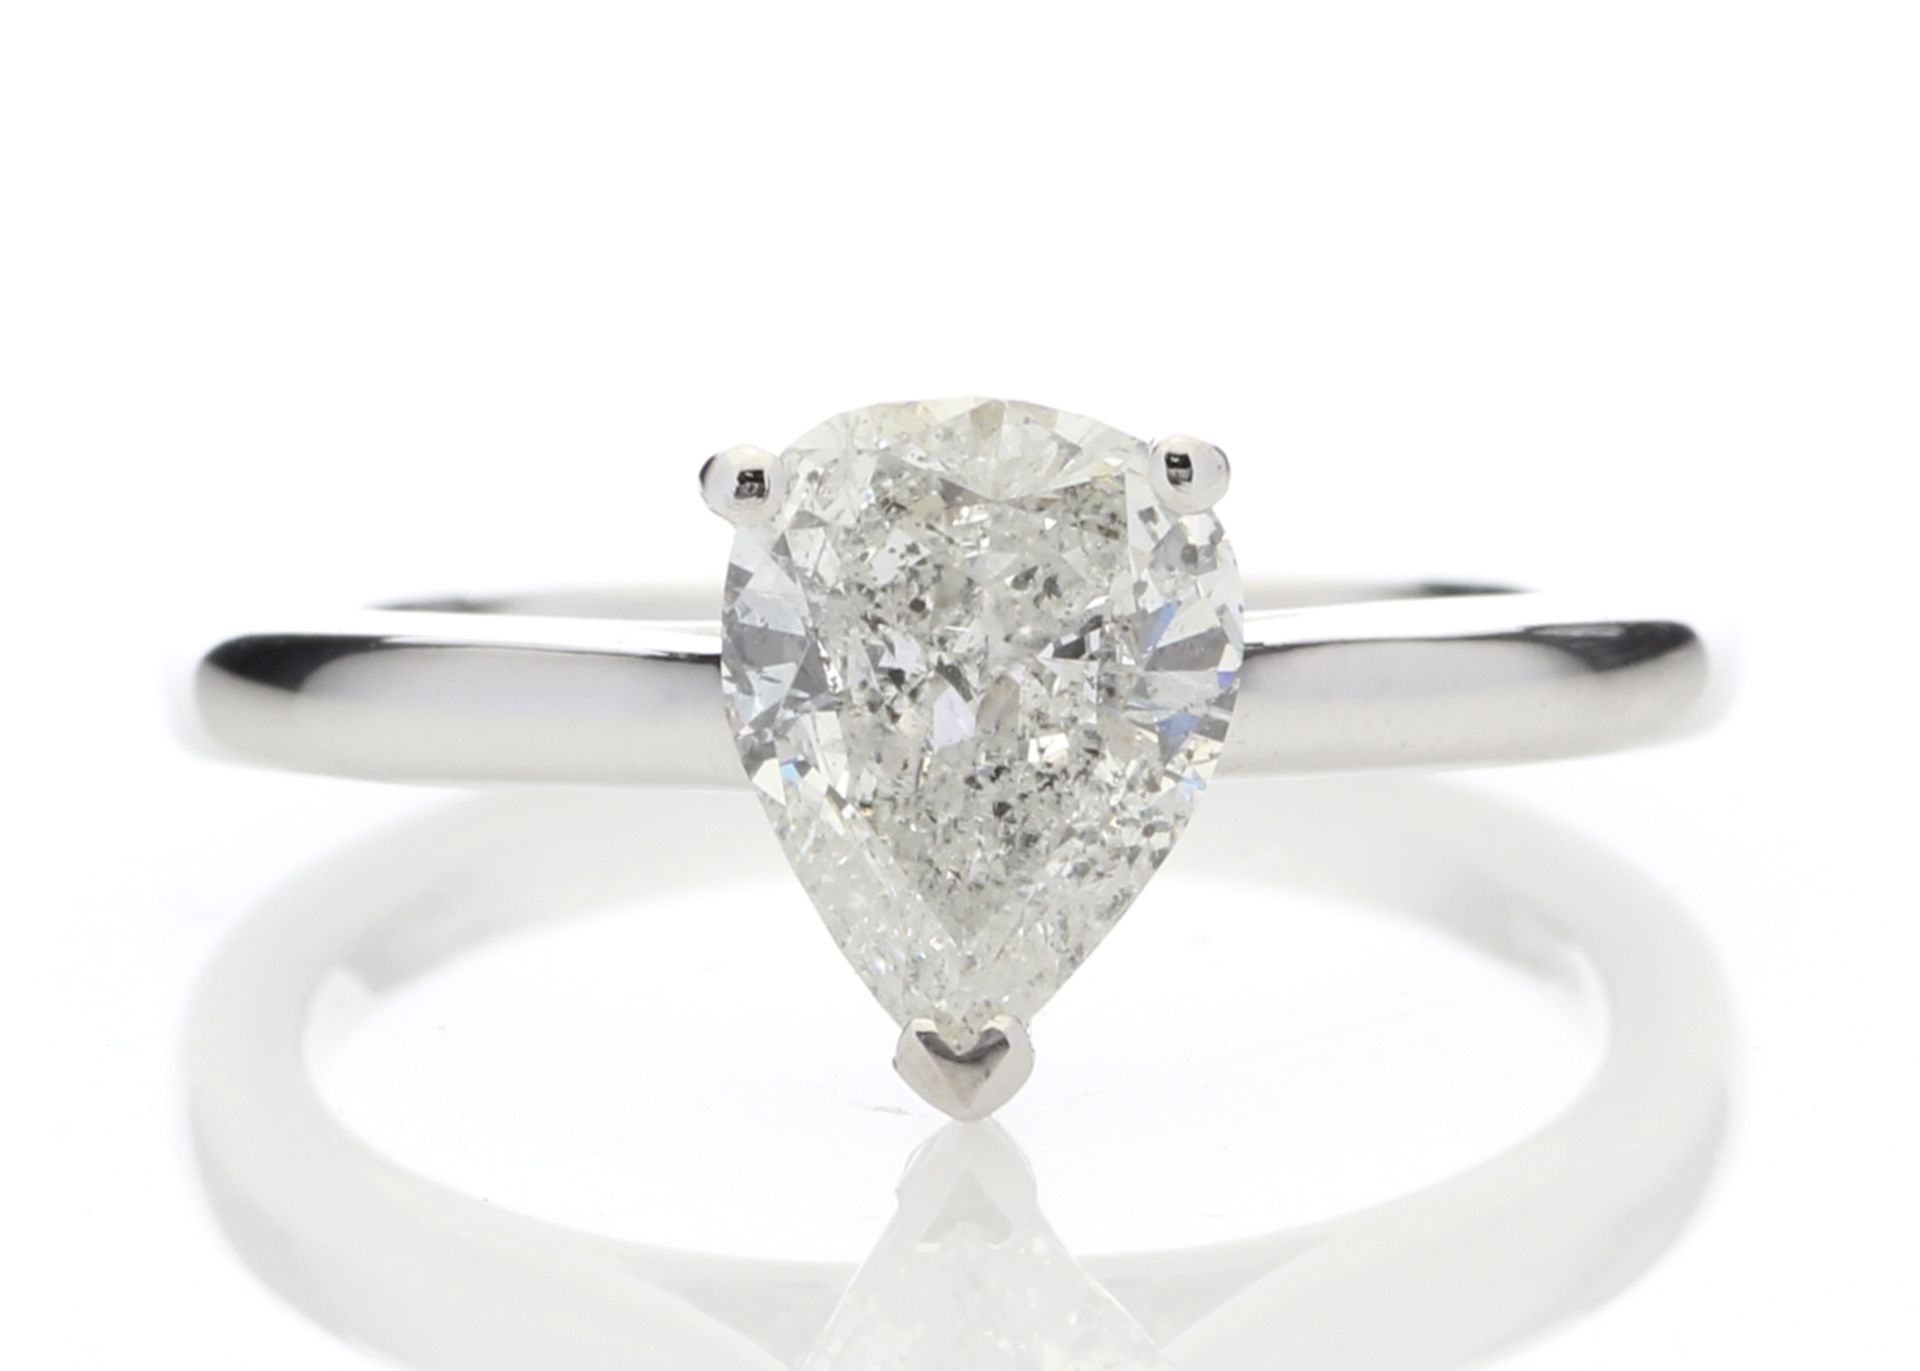 18ct White Gold Pear Cut Diamond Ring 1.02 Carats - Valued By GIE £18,350.00 - One stunning